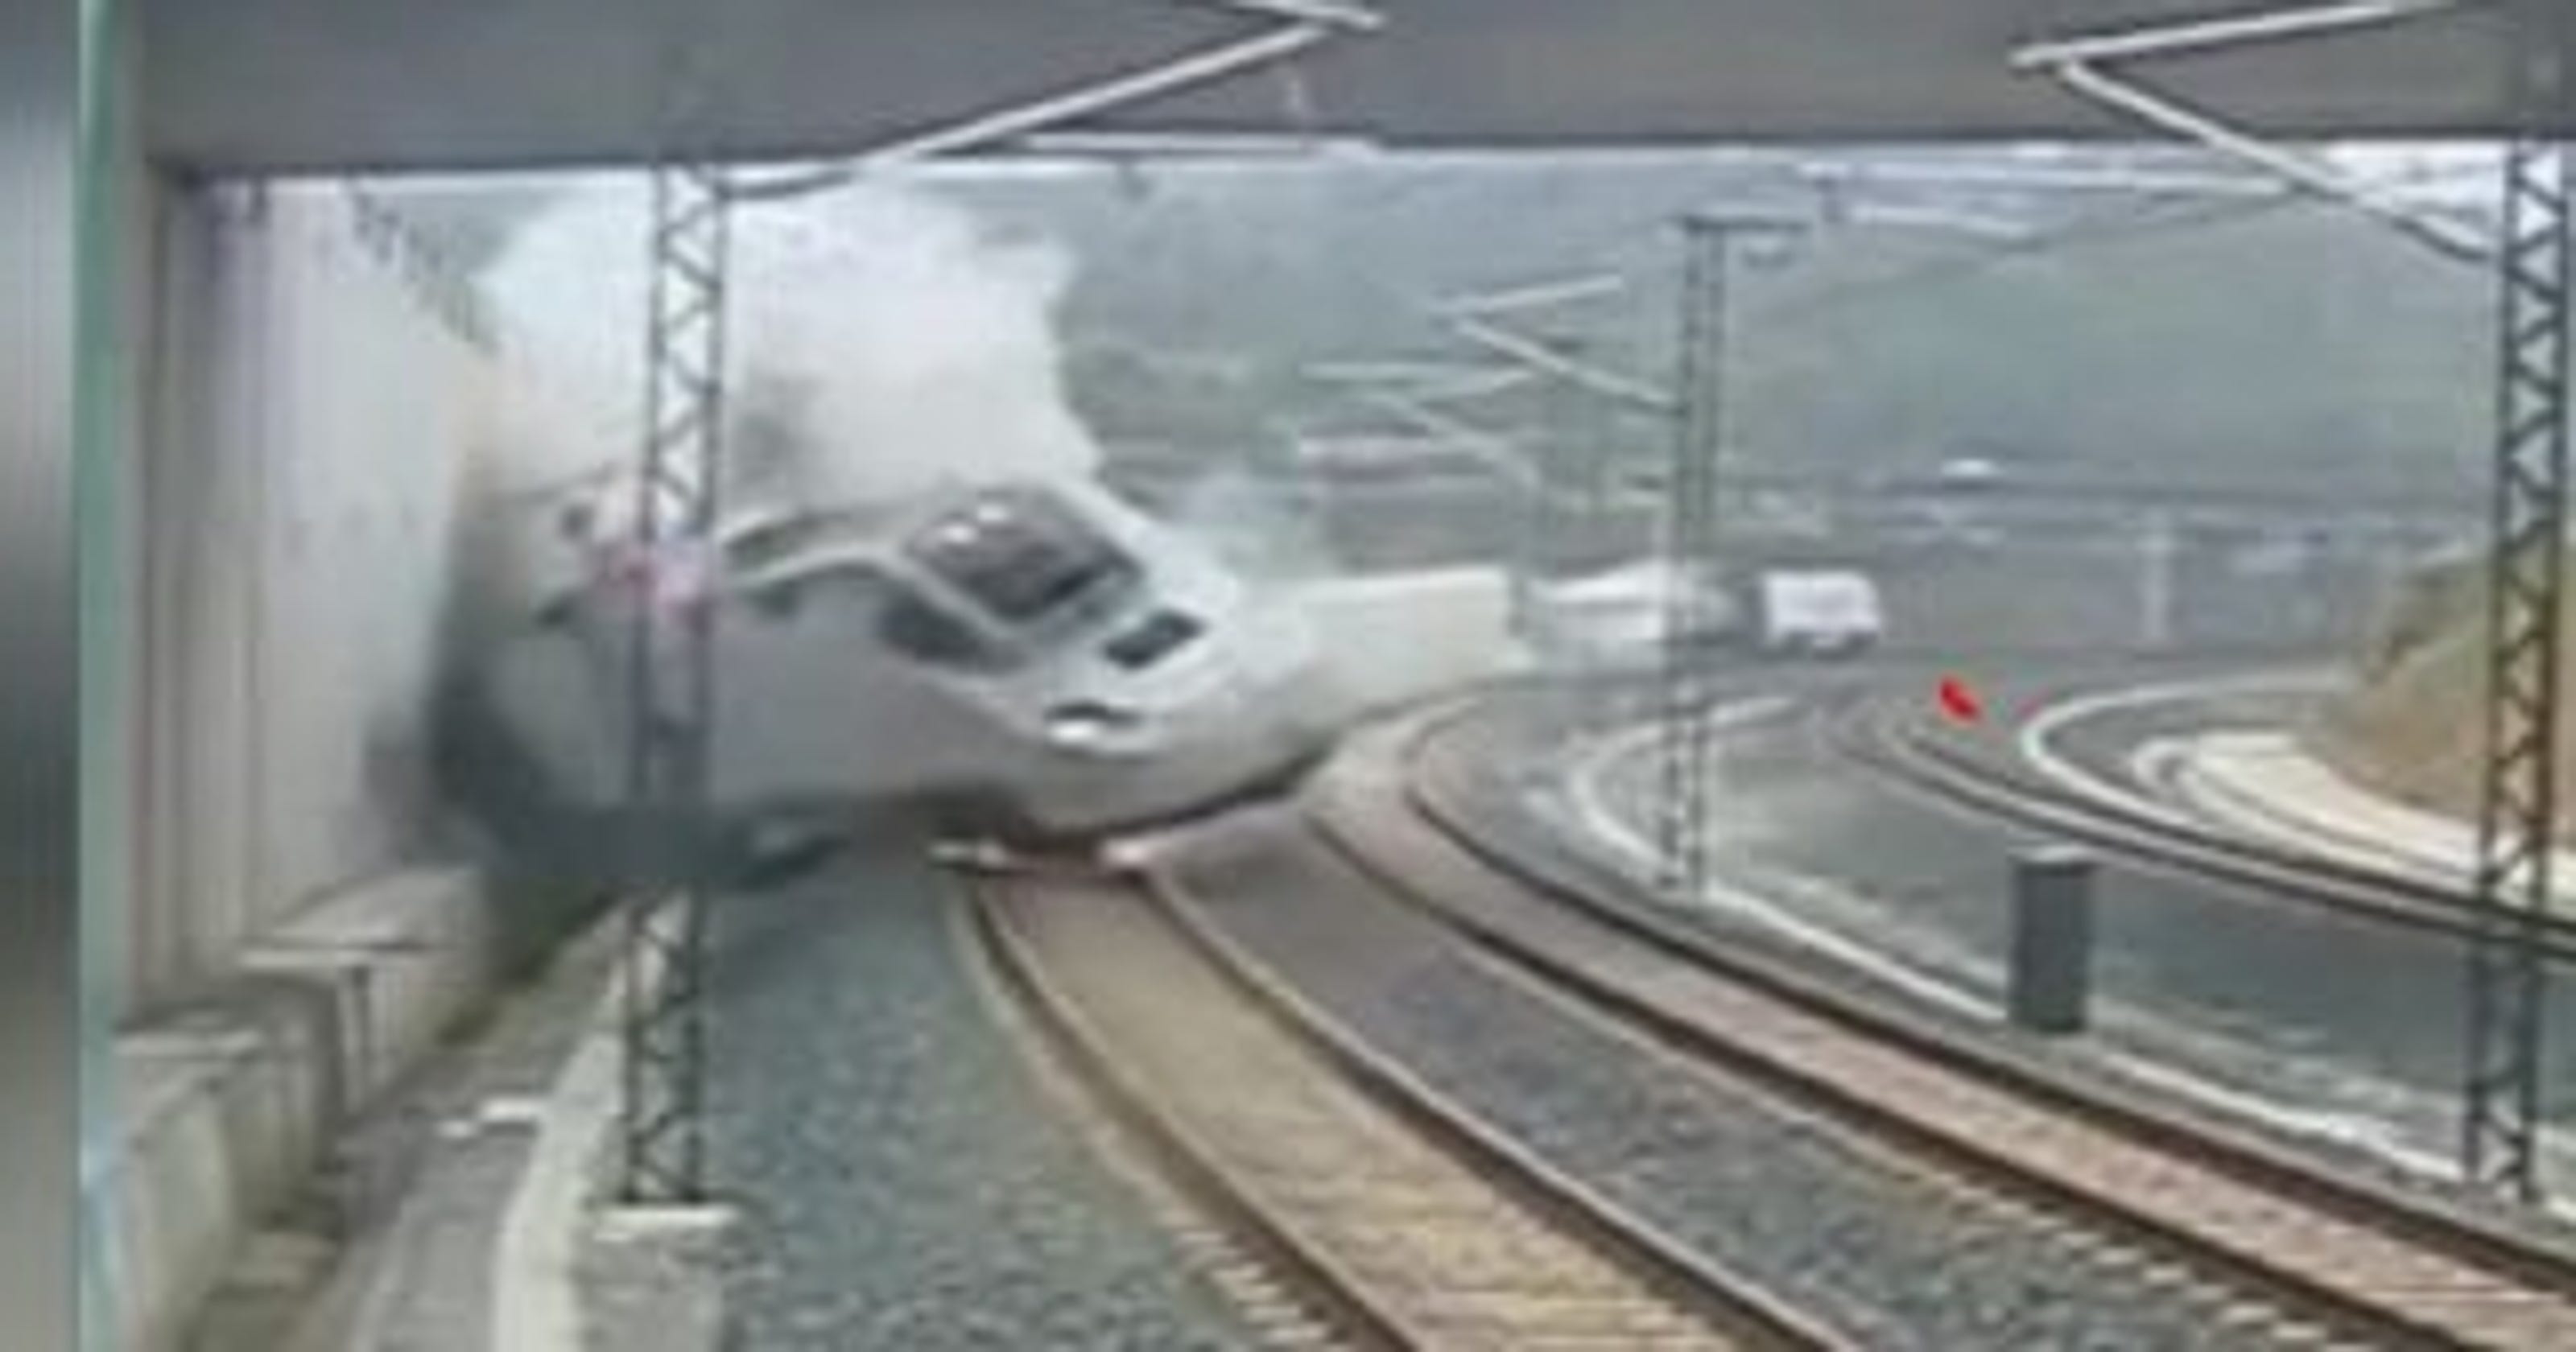 Video shows the moment of the Spain train crash